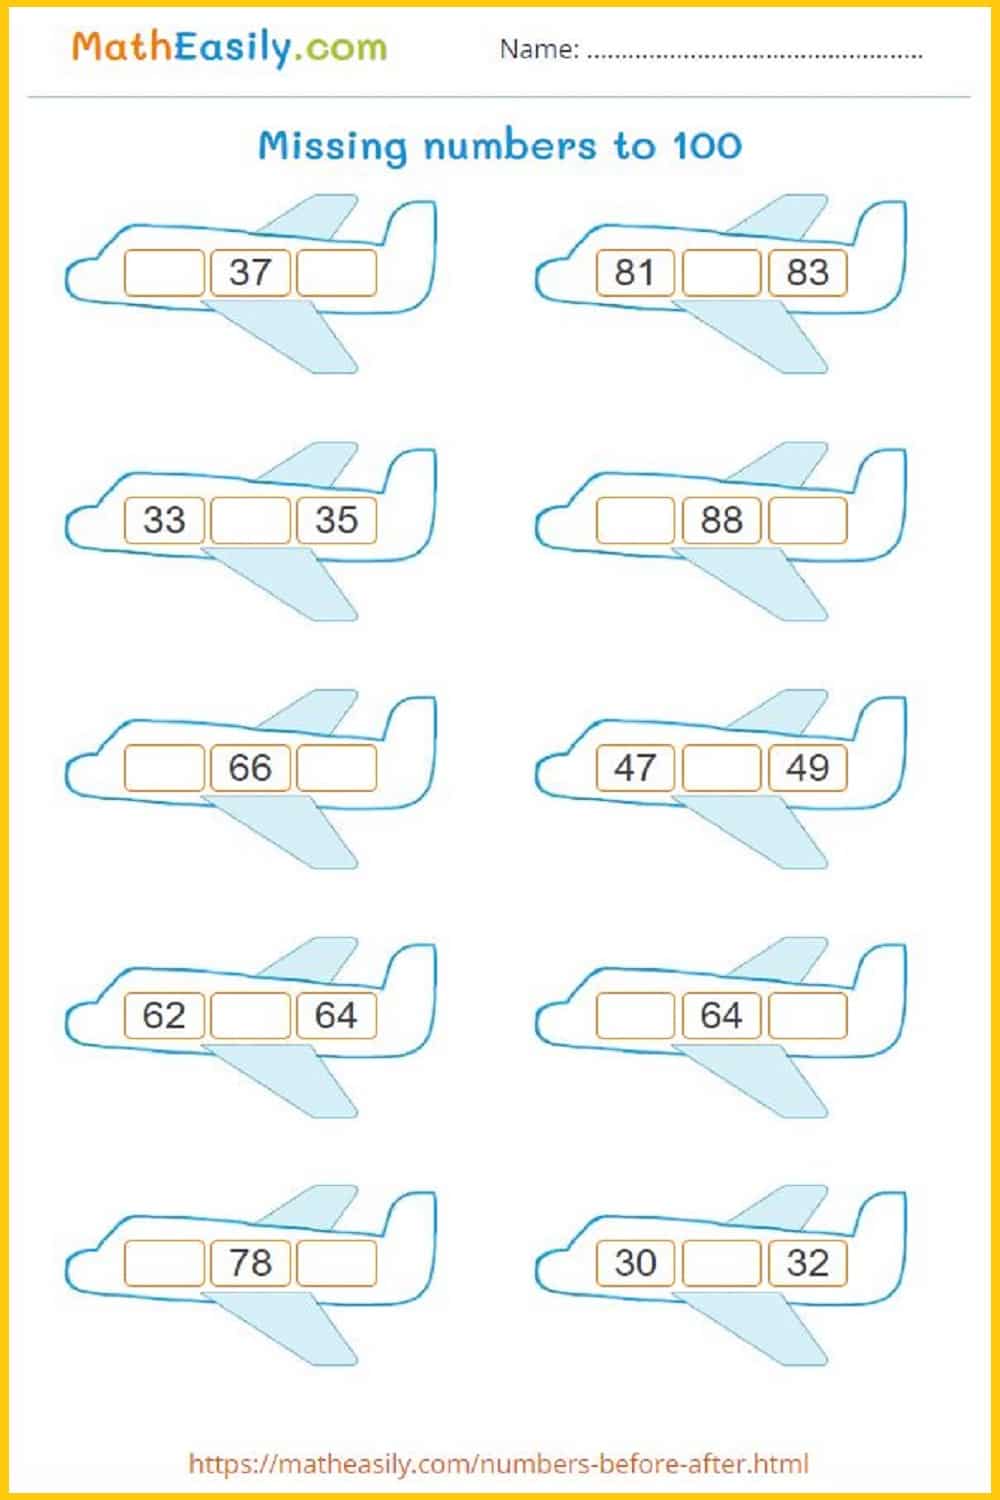 Numbers before and after worksheets. numbers before after and between worksheets. before and after worksheets for grade 1.
  Download free before and after numbers worksheets in PDF. numbers after worksheets. numbers before and after to 100.
  Before and after numbers to 100 worksheets. before and after number worksheets pdf. kindergarten before and after worksheets.